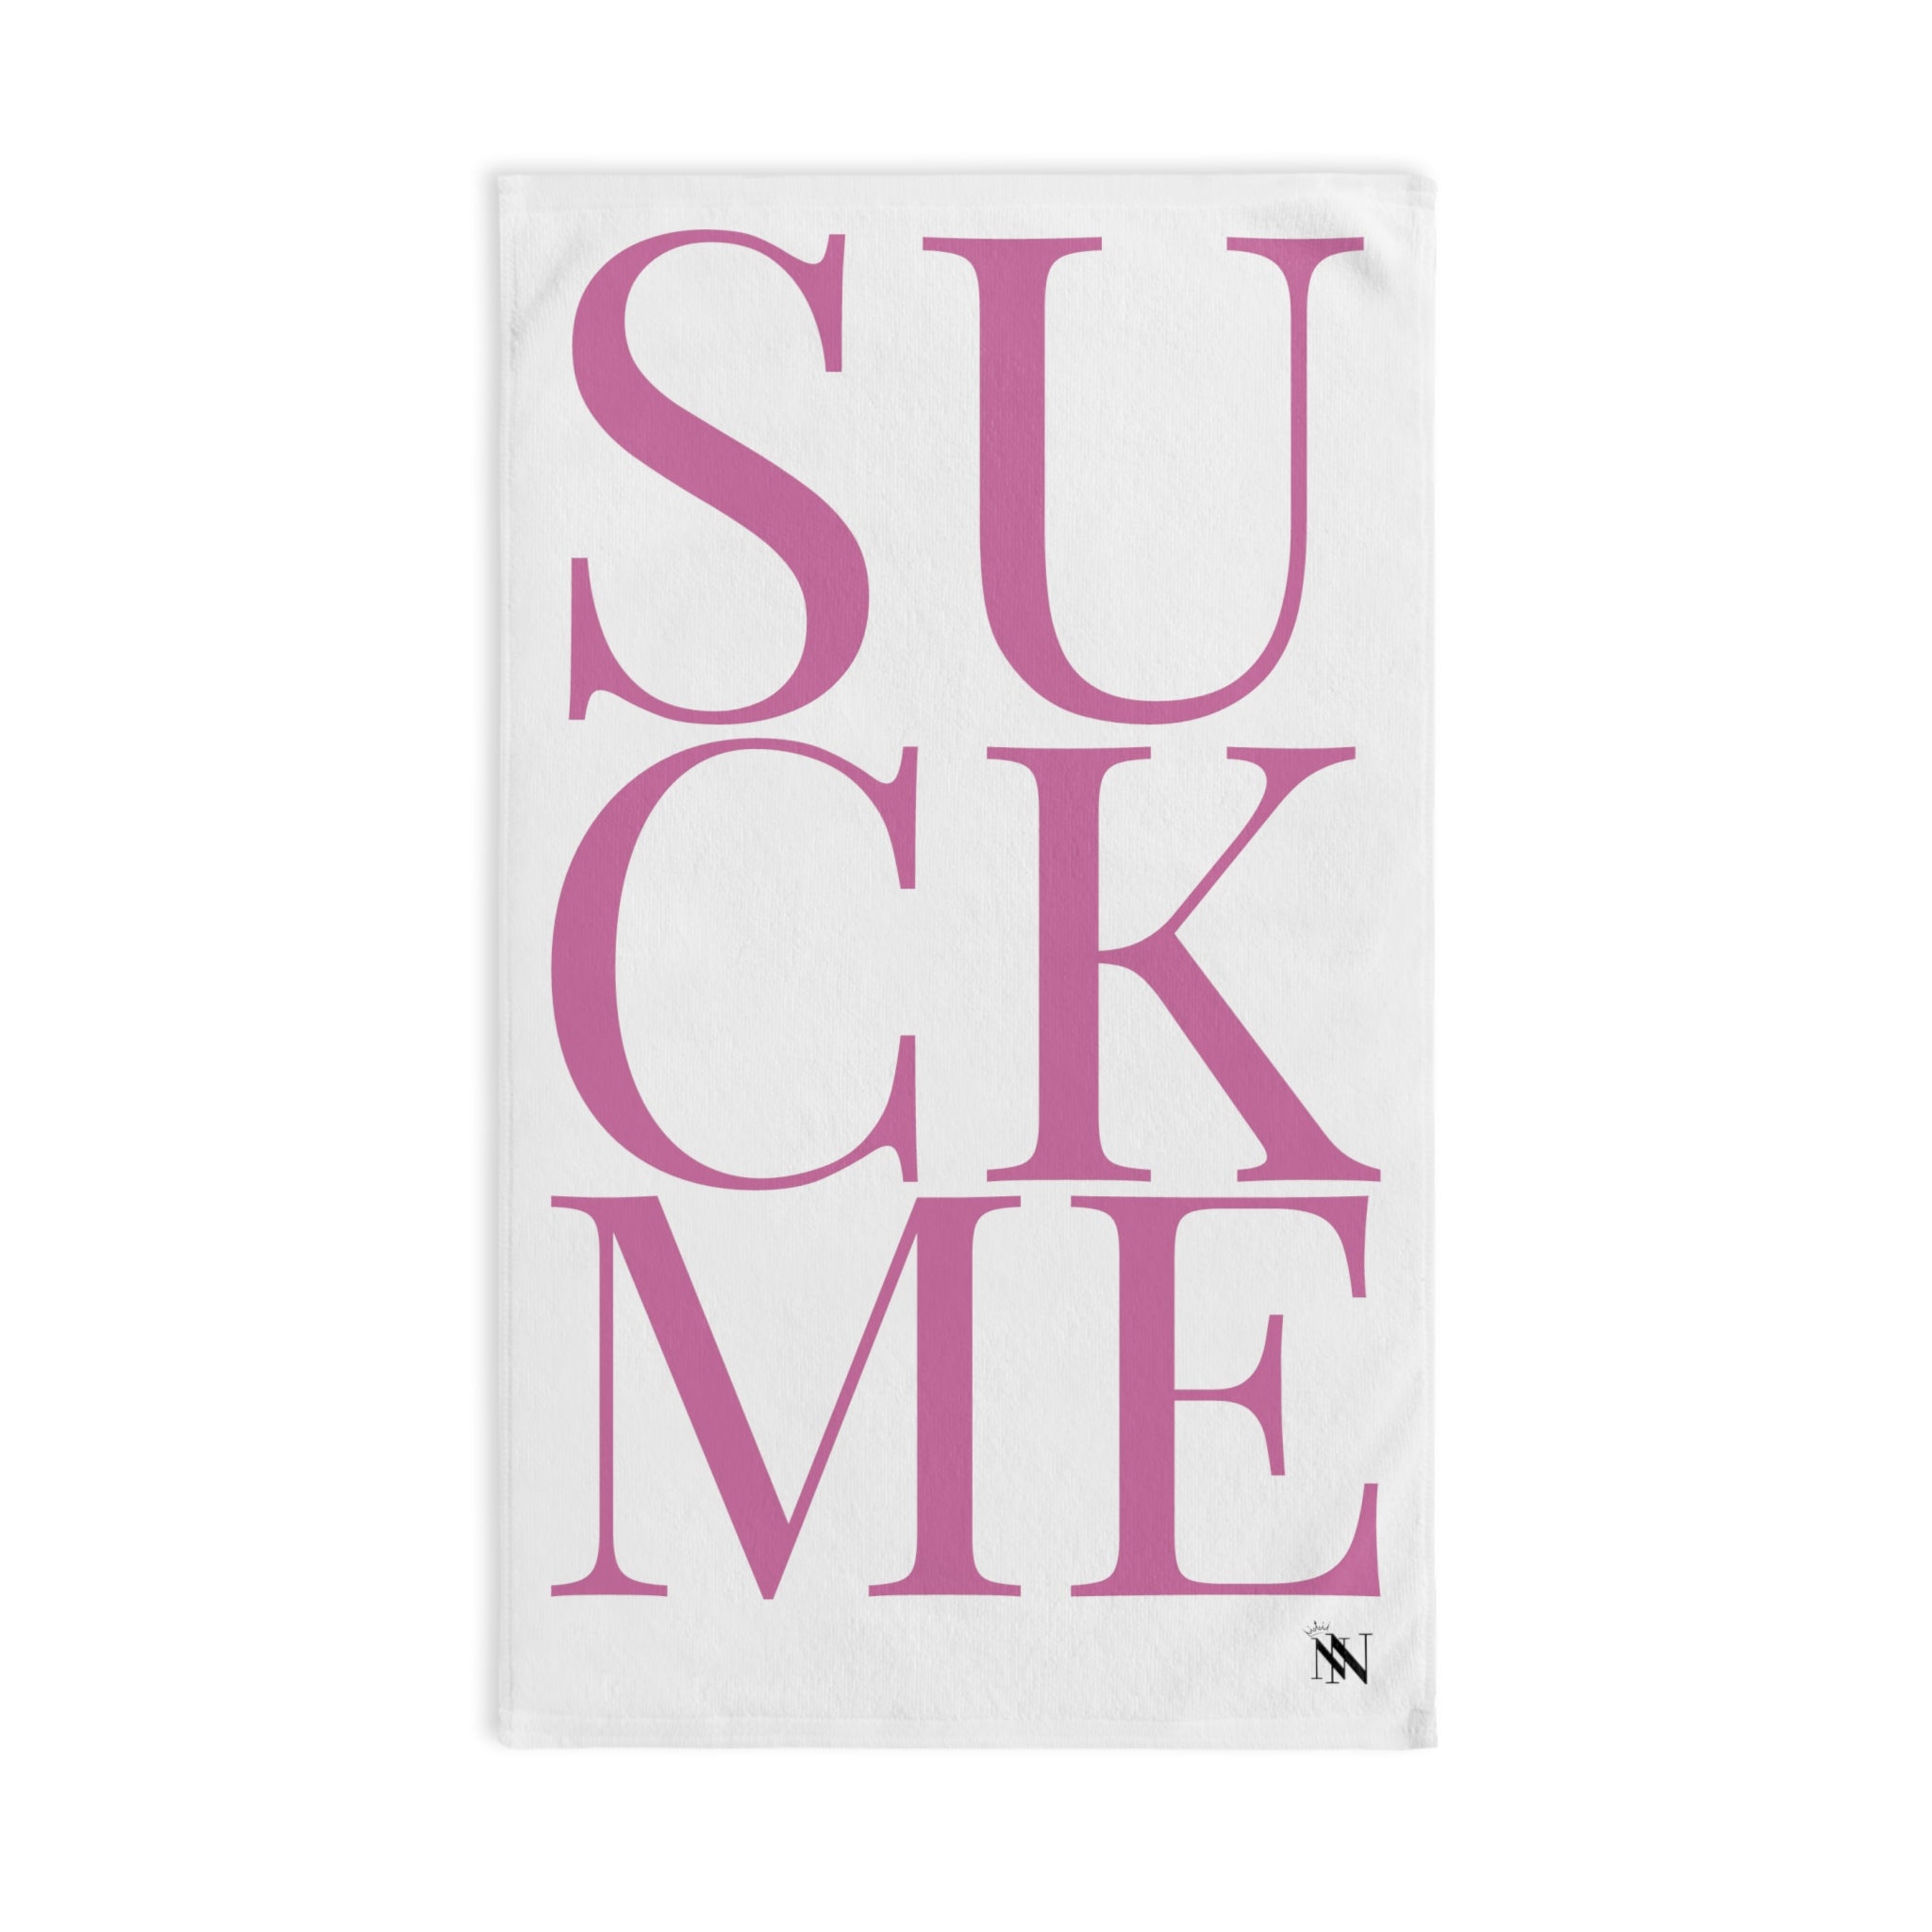 Suck Me Pink White | Funny Gifts for Men - Gifts for Him - Birthday Gifts for Men, Him, Her, Husband, Boyfriend, Girlfriend, New Couple Gifts, Fathers & Valentines Day Gifts, Christmas Gifts NECTAR NAPKINS